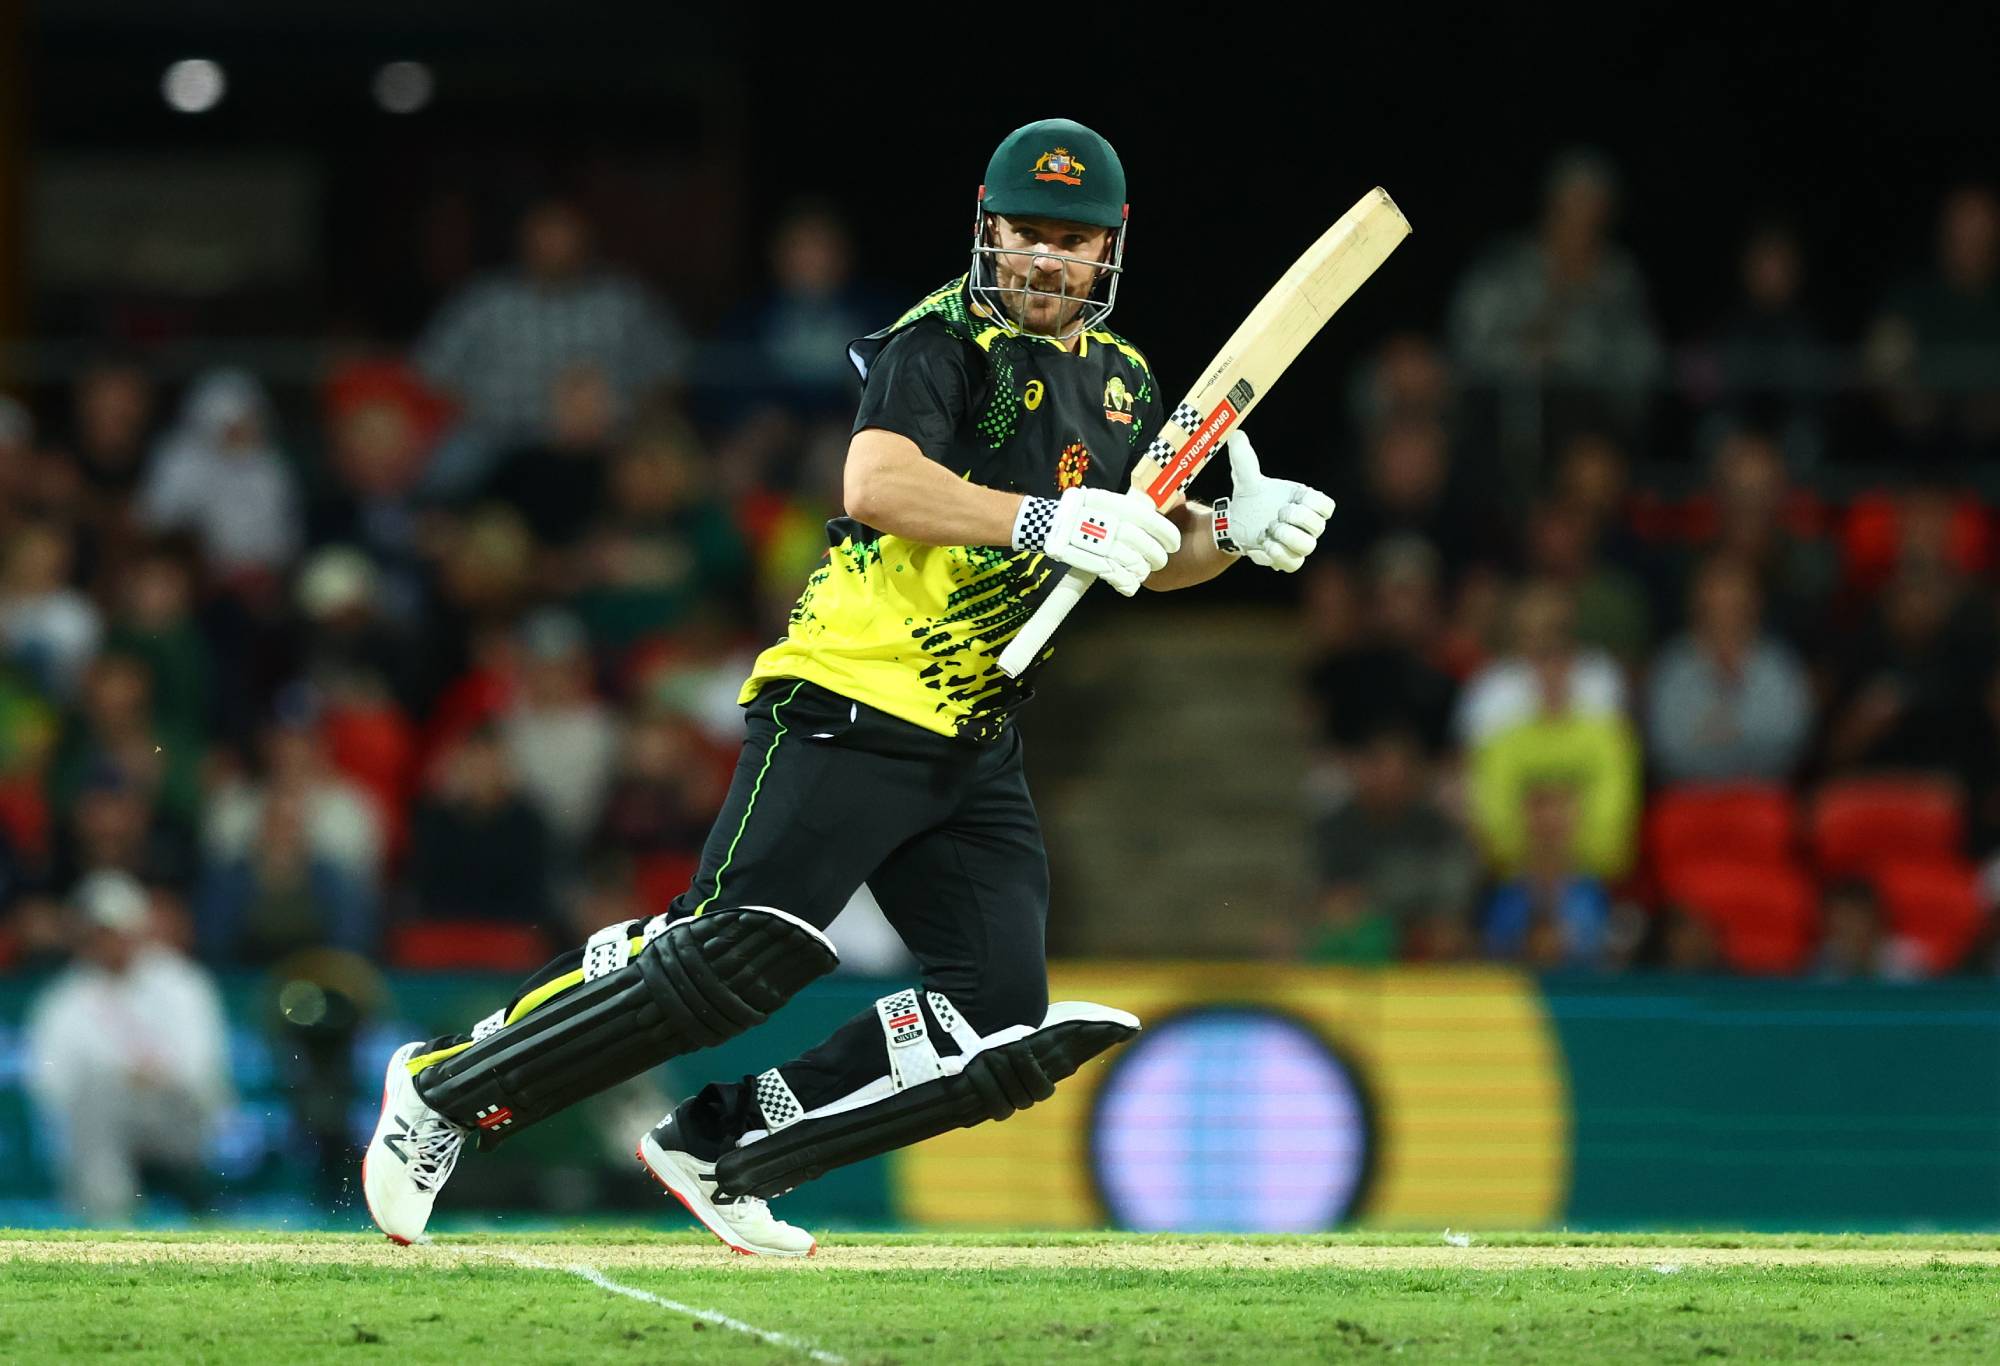 GOLD COAST, AUSTRALIA - OCTOBER 05: Aaron Finch of Australia bats during game one of the T20 International series between Australia and the West Indies at Metricon Stadium on October 05, 2022 in Gold Coast, Australia. (Photo by Chris Hyde/Getty Images)